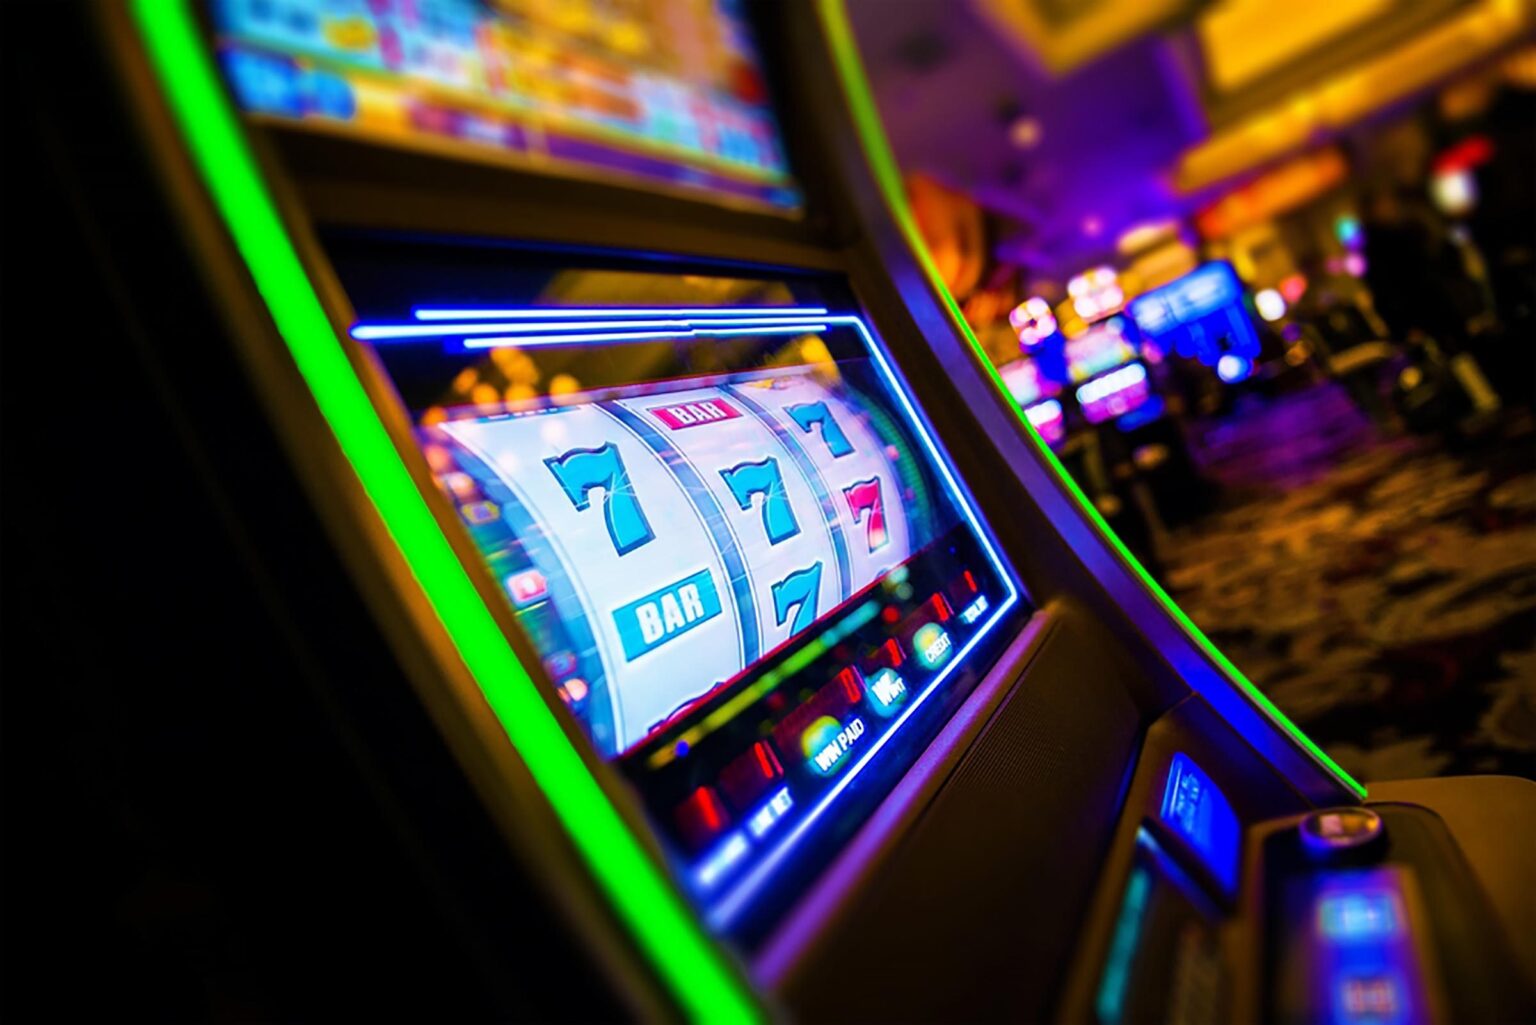 Looking for the best gambling options? Examine the pros and cons of casino games vs. online games.